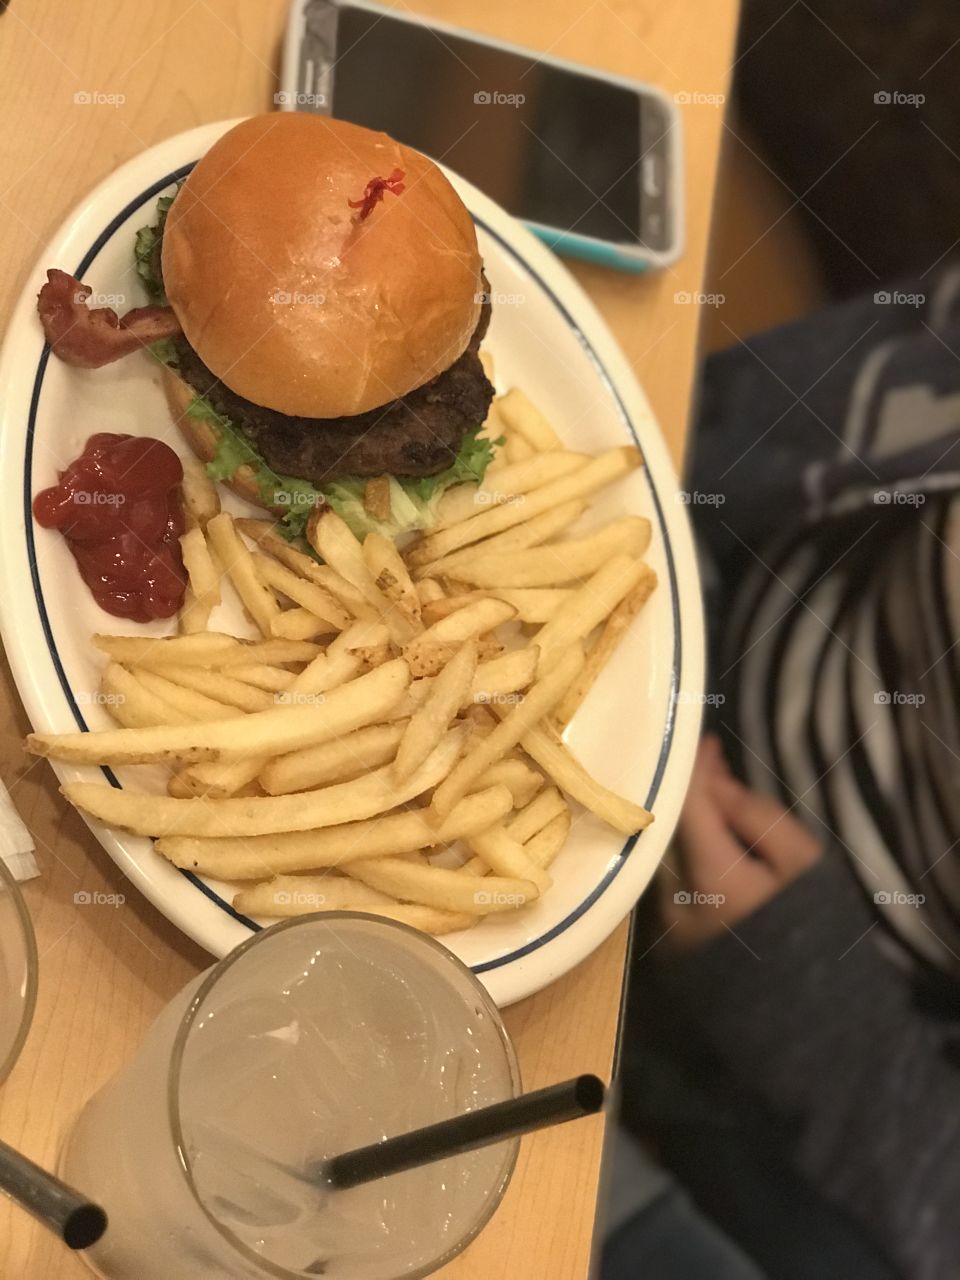 Dinner at IHOP bacon burger and fries with lemonade 